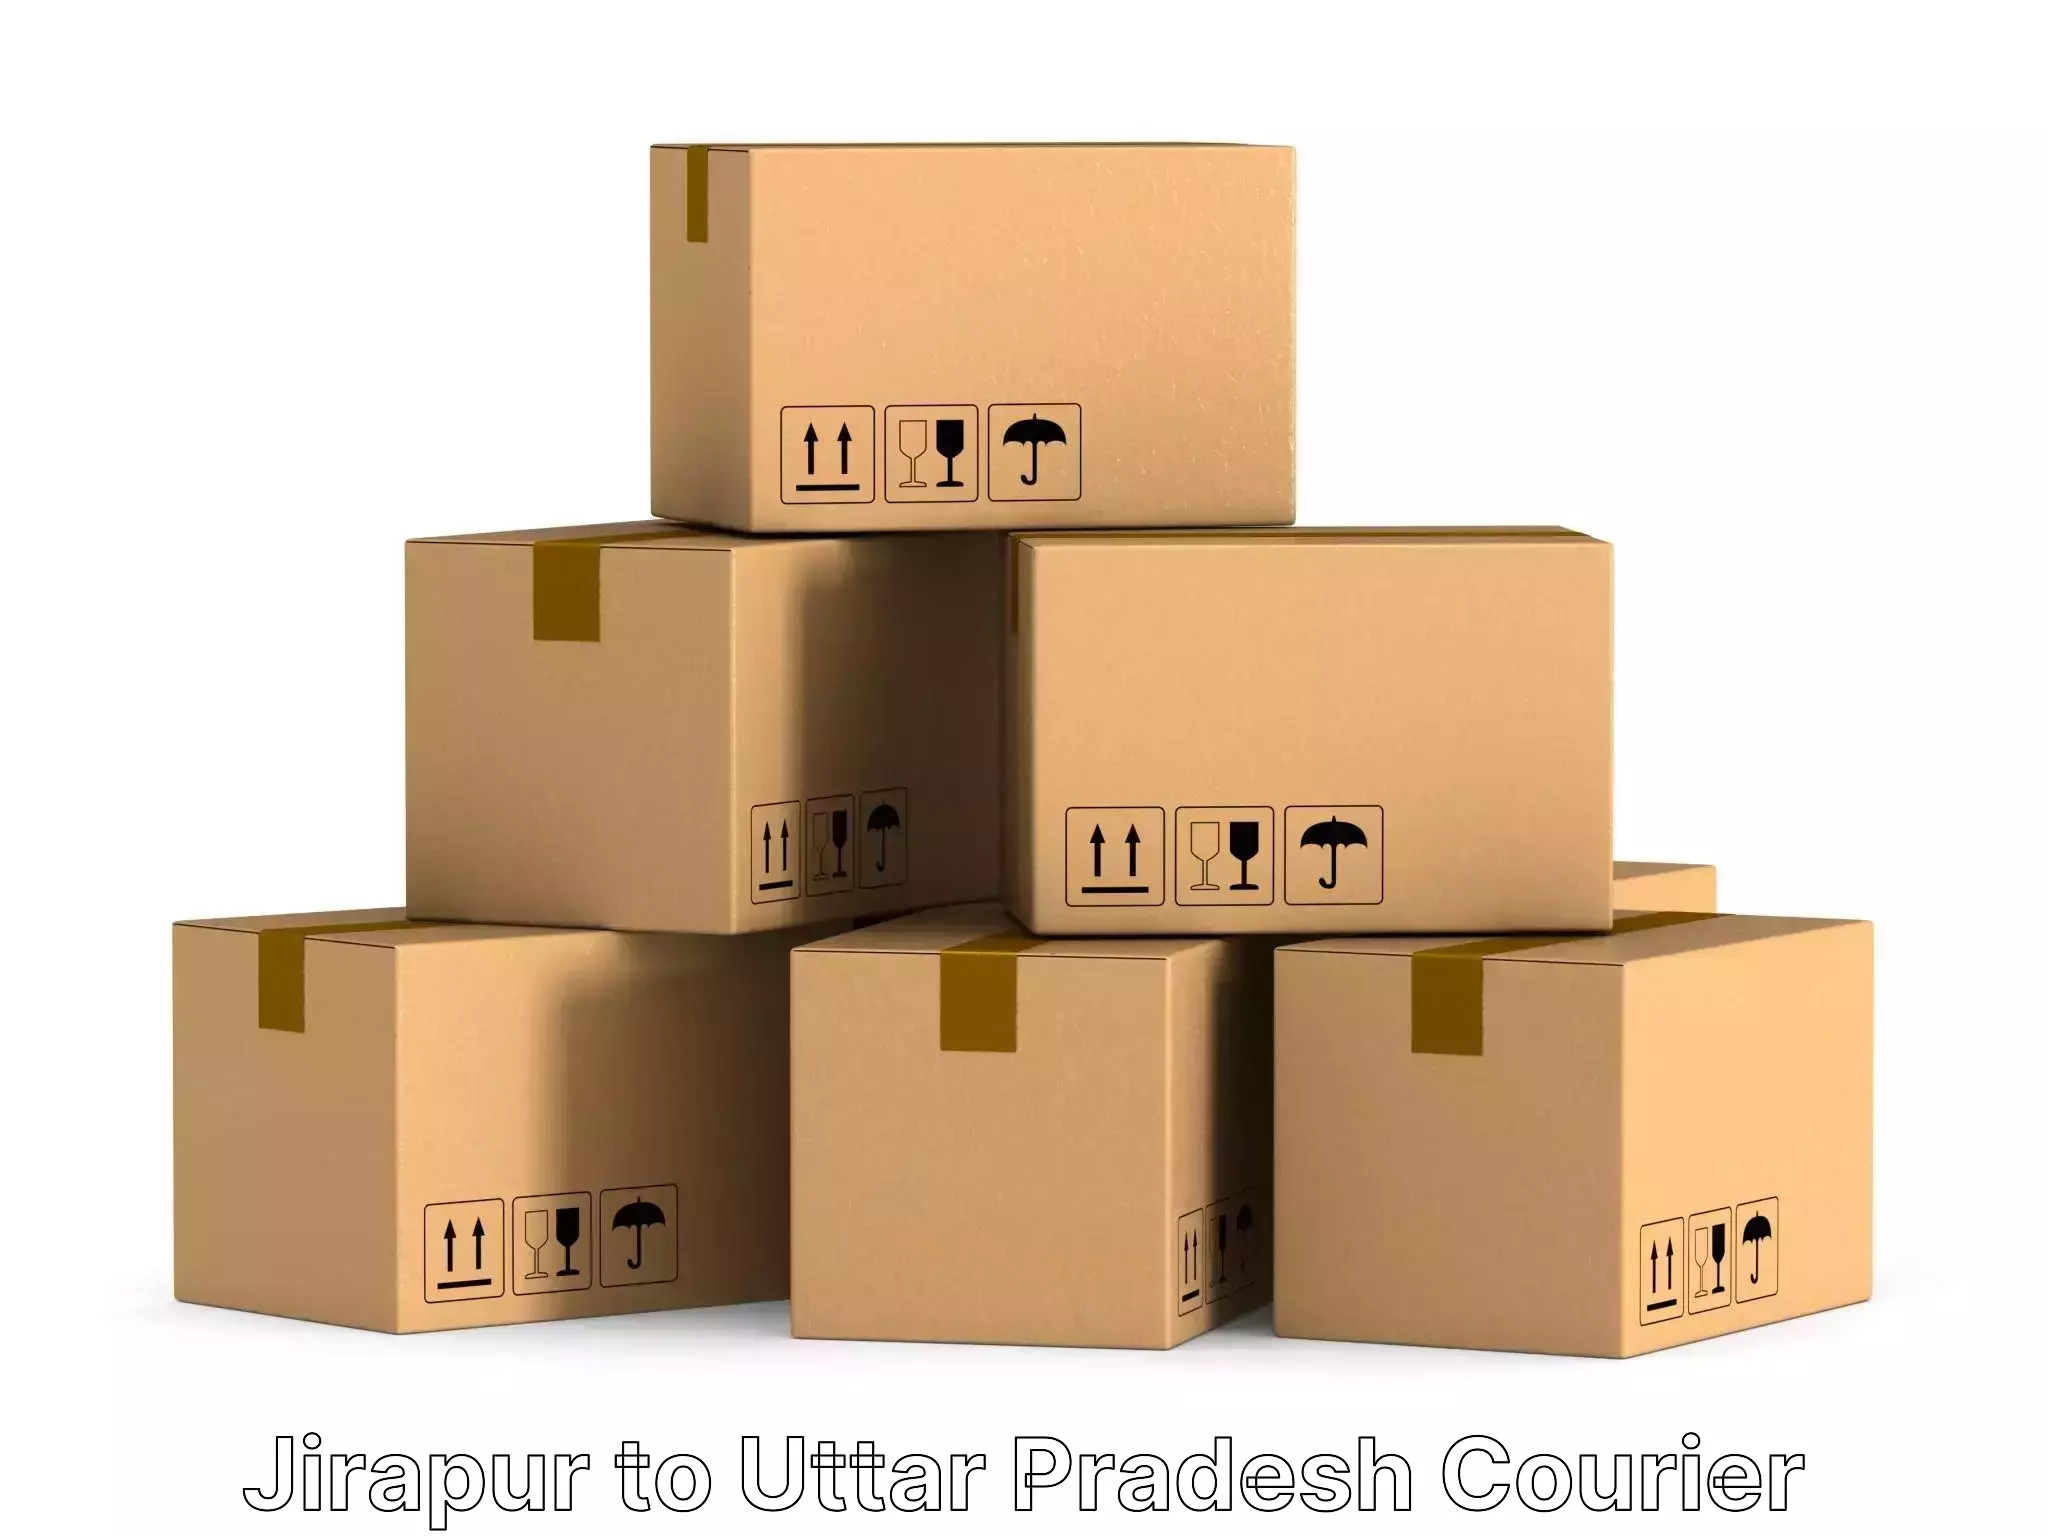 Home goods moving company Jirapur to Agra